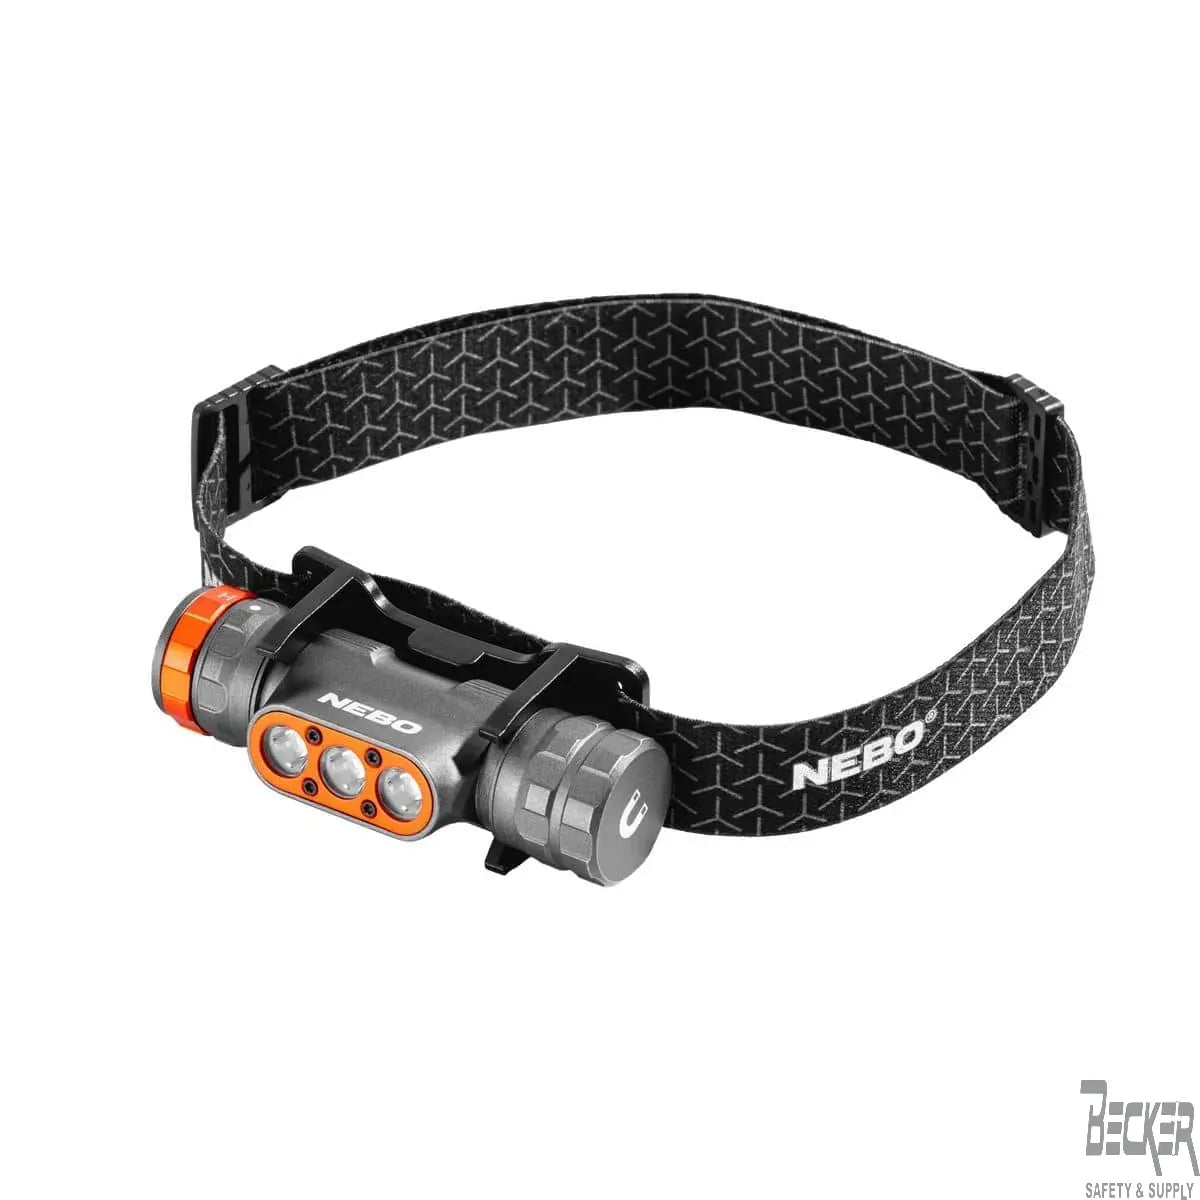 NEBO - Transcend Waterproof, USB-C Rechargeable Headlamp with 1,500 Lumen Turbo Mode - Becker Safety and Supply